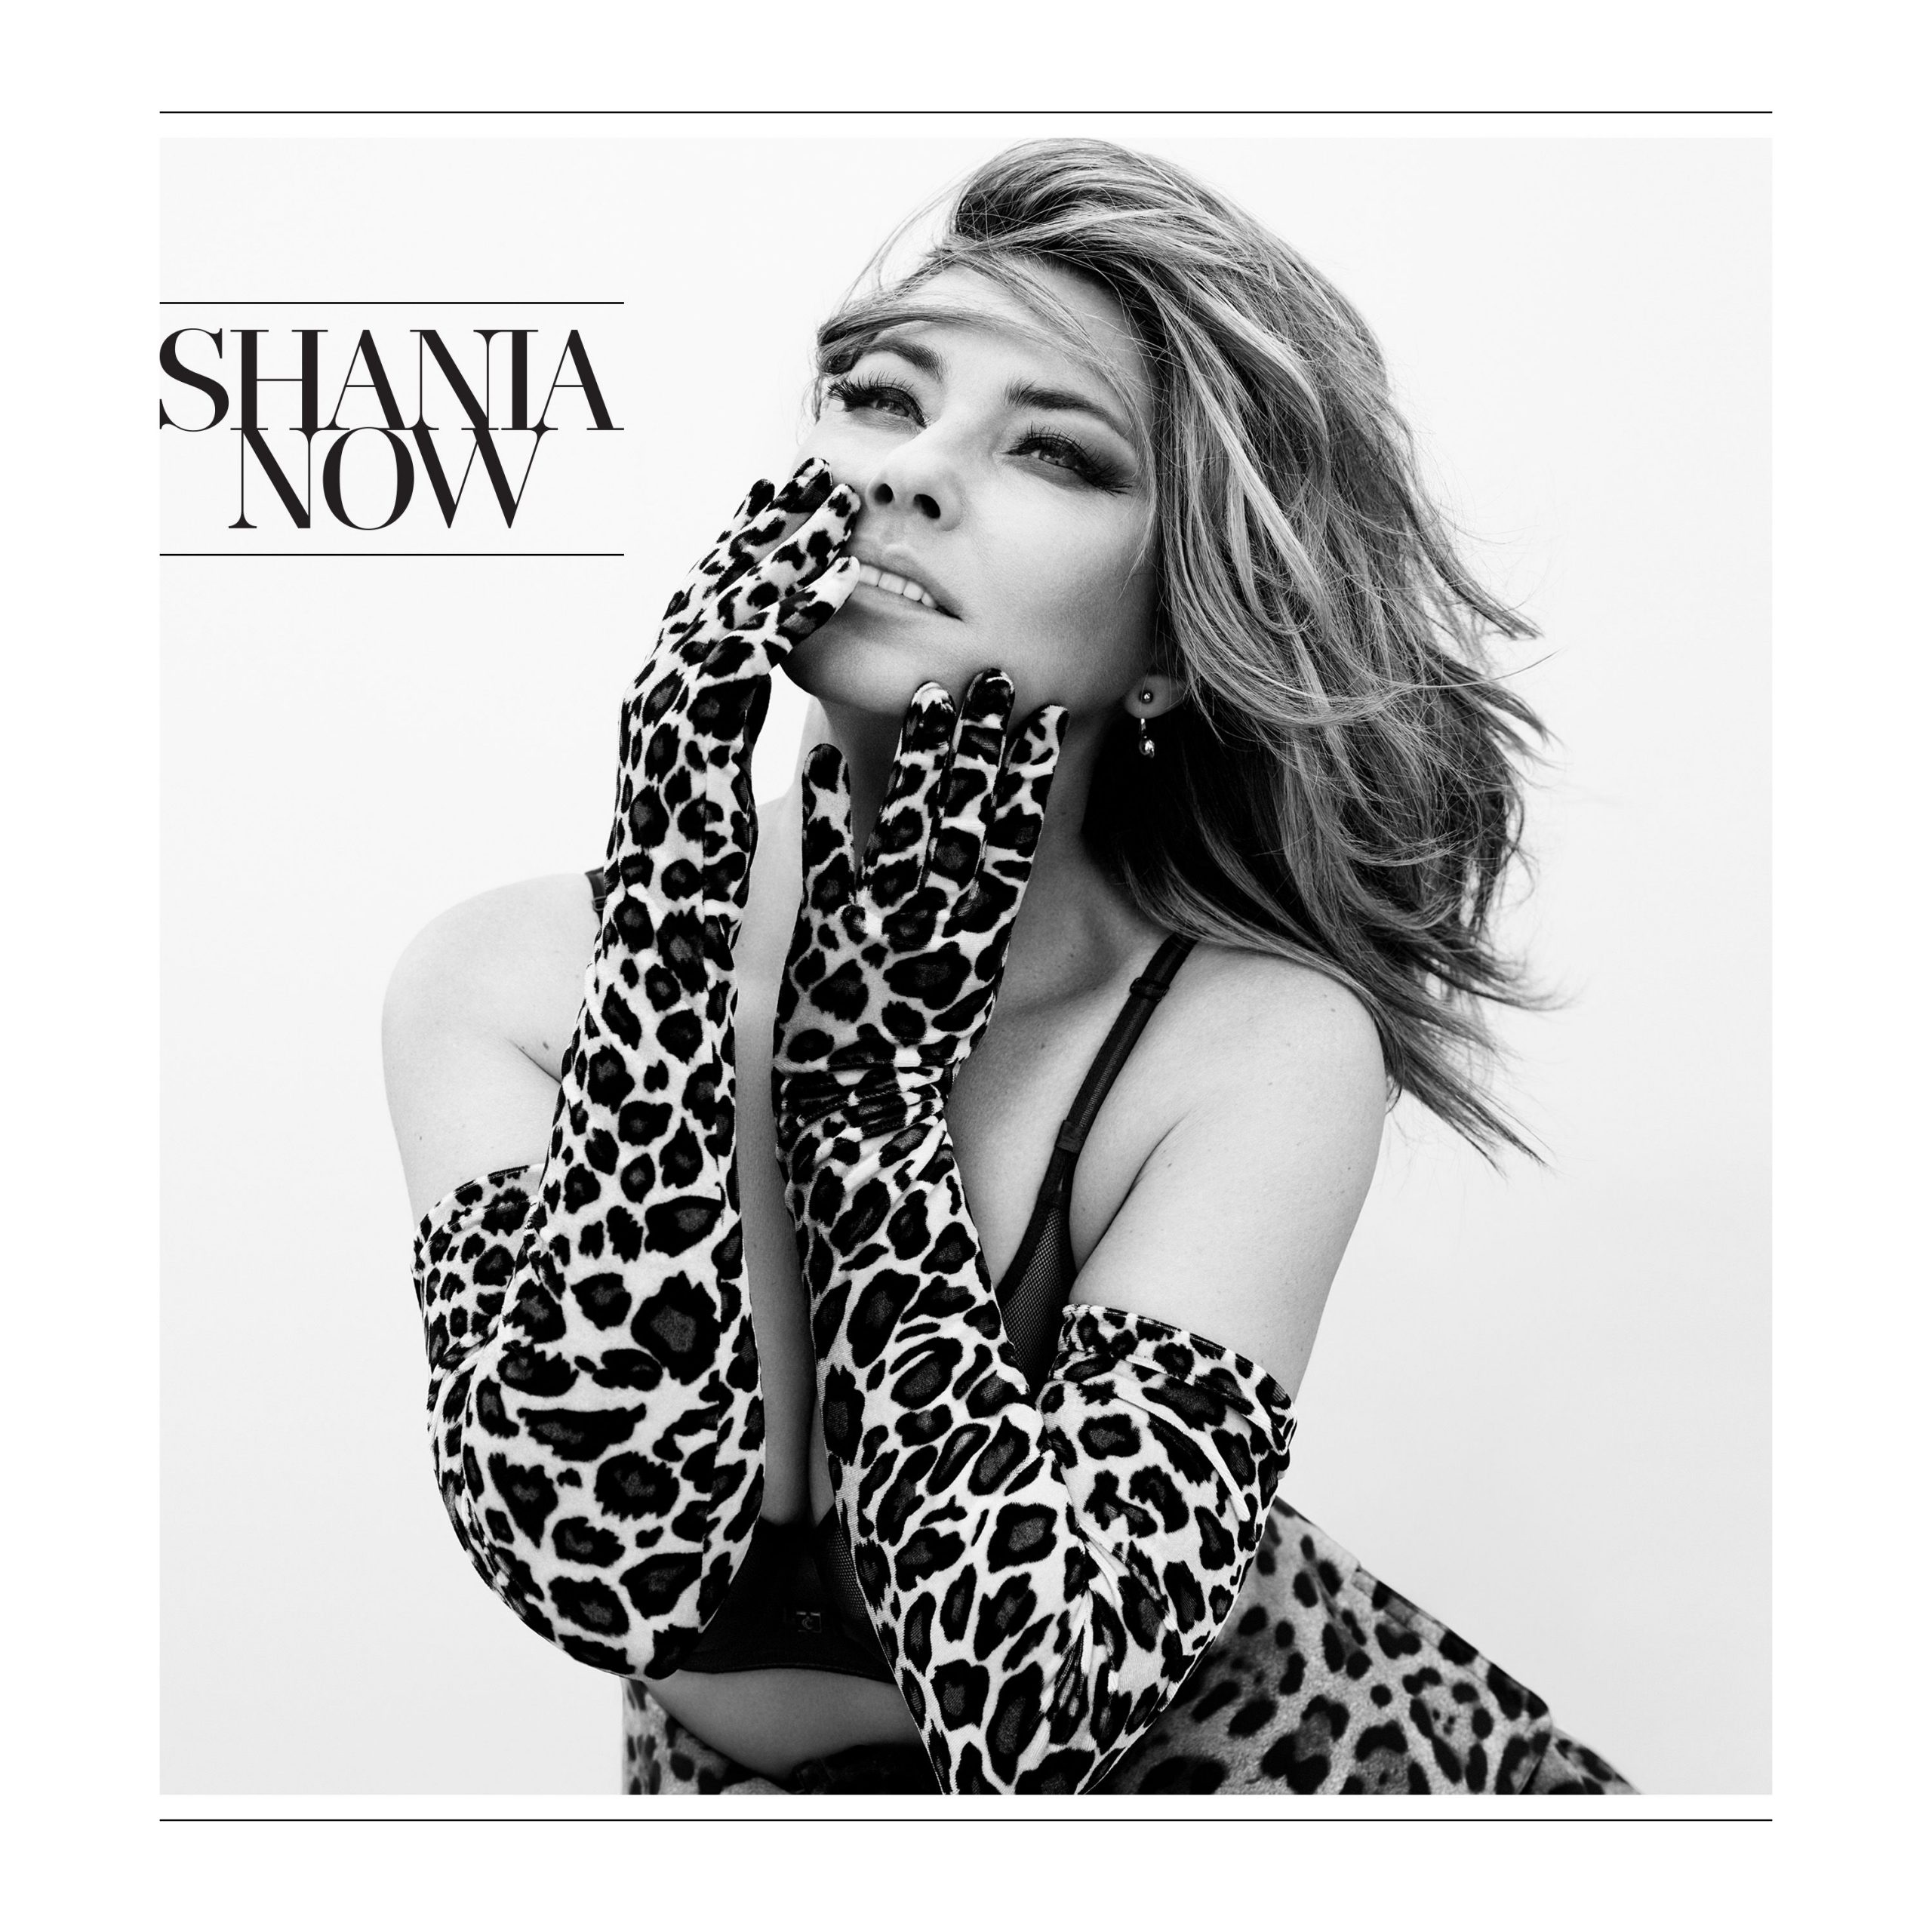 Shania Twain Tops Global Charts with NOW